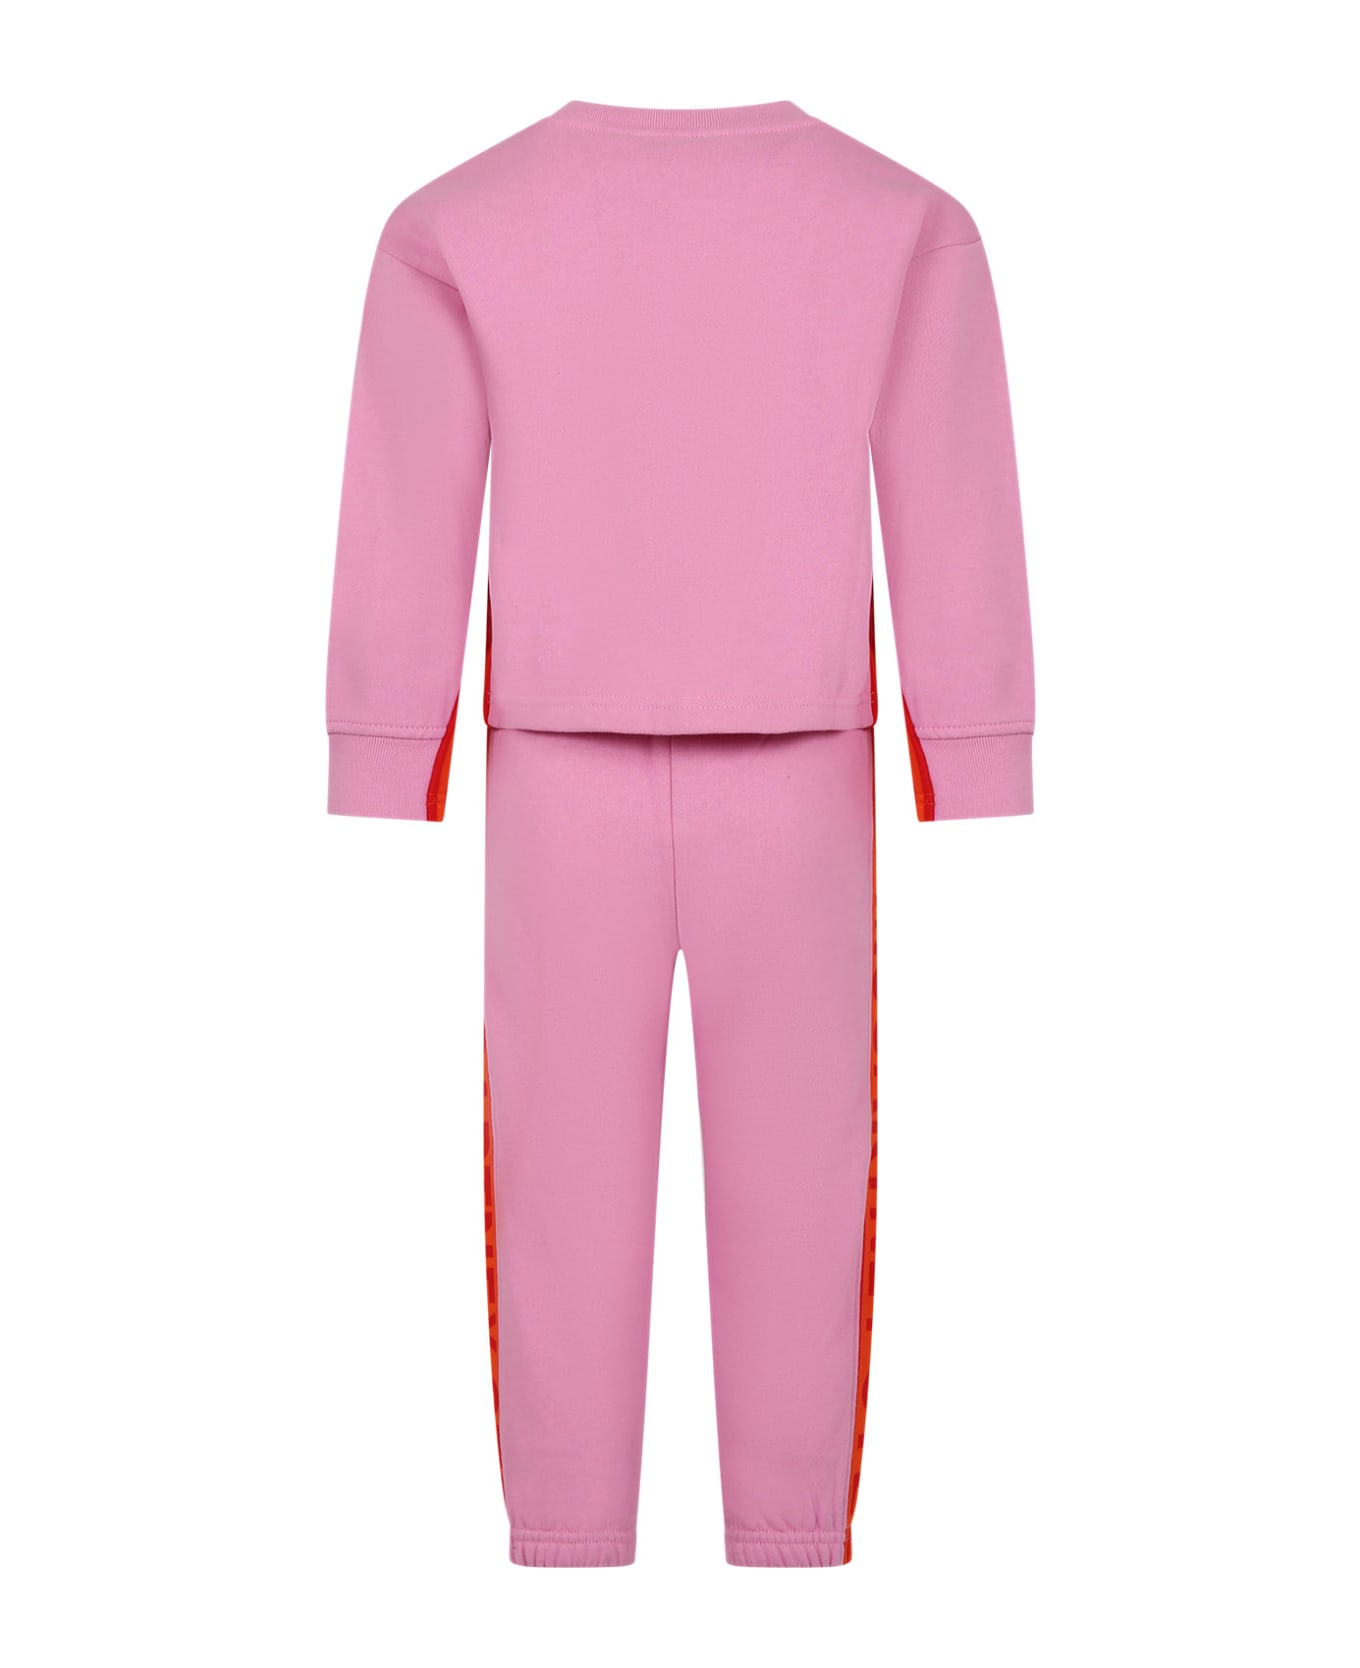 Stella McCartney Kids Pink Outfit For Girl With Logo - Pink ジャンプスーツ